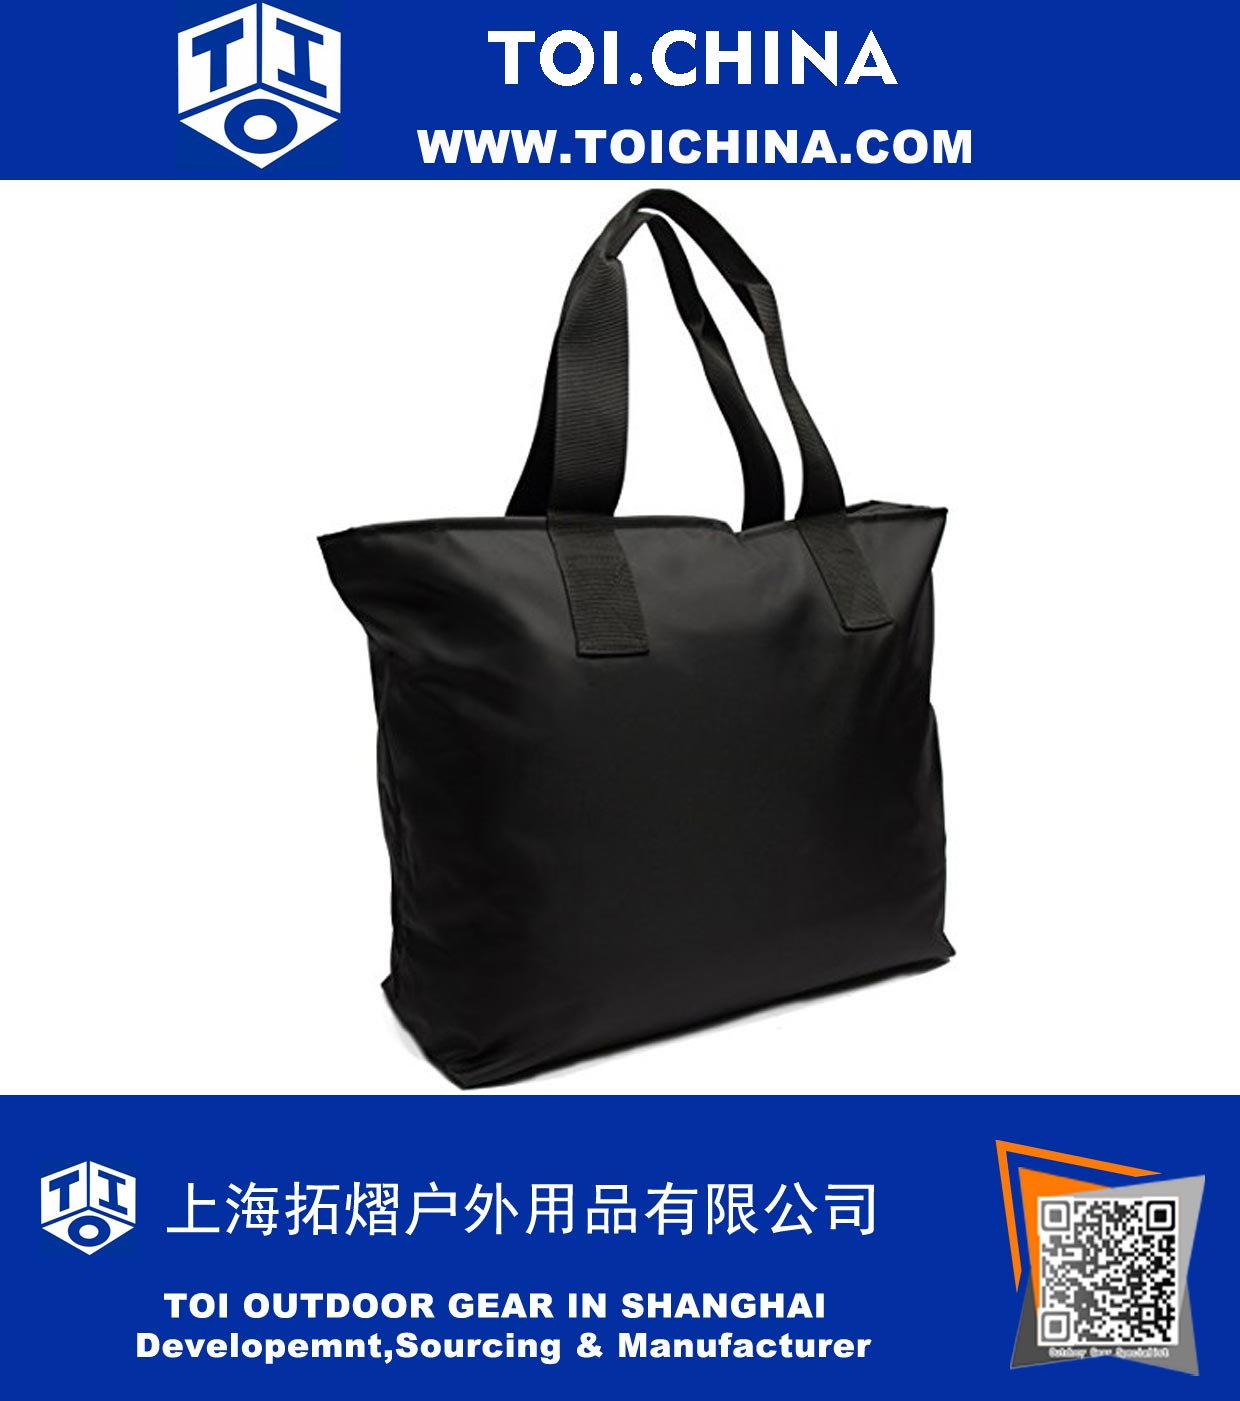 Large Nylon Tote Bag For Shopping, Beach, Sports, Gym - With Double Top Zipper And Long Handles - Heavy Nylon Canvas With Lining